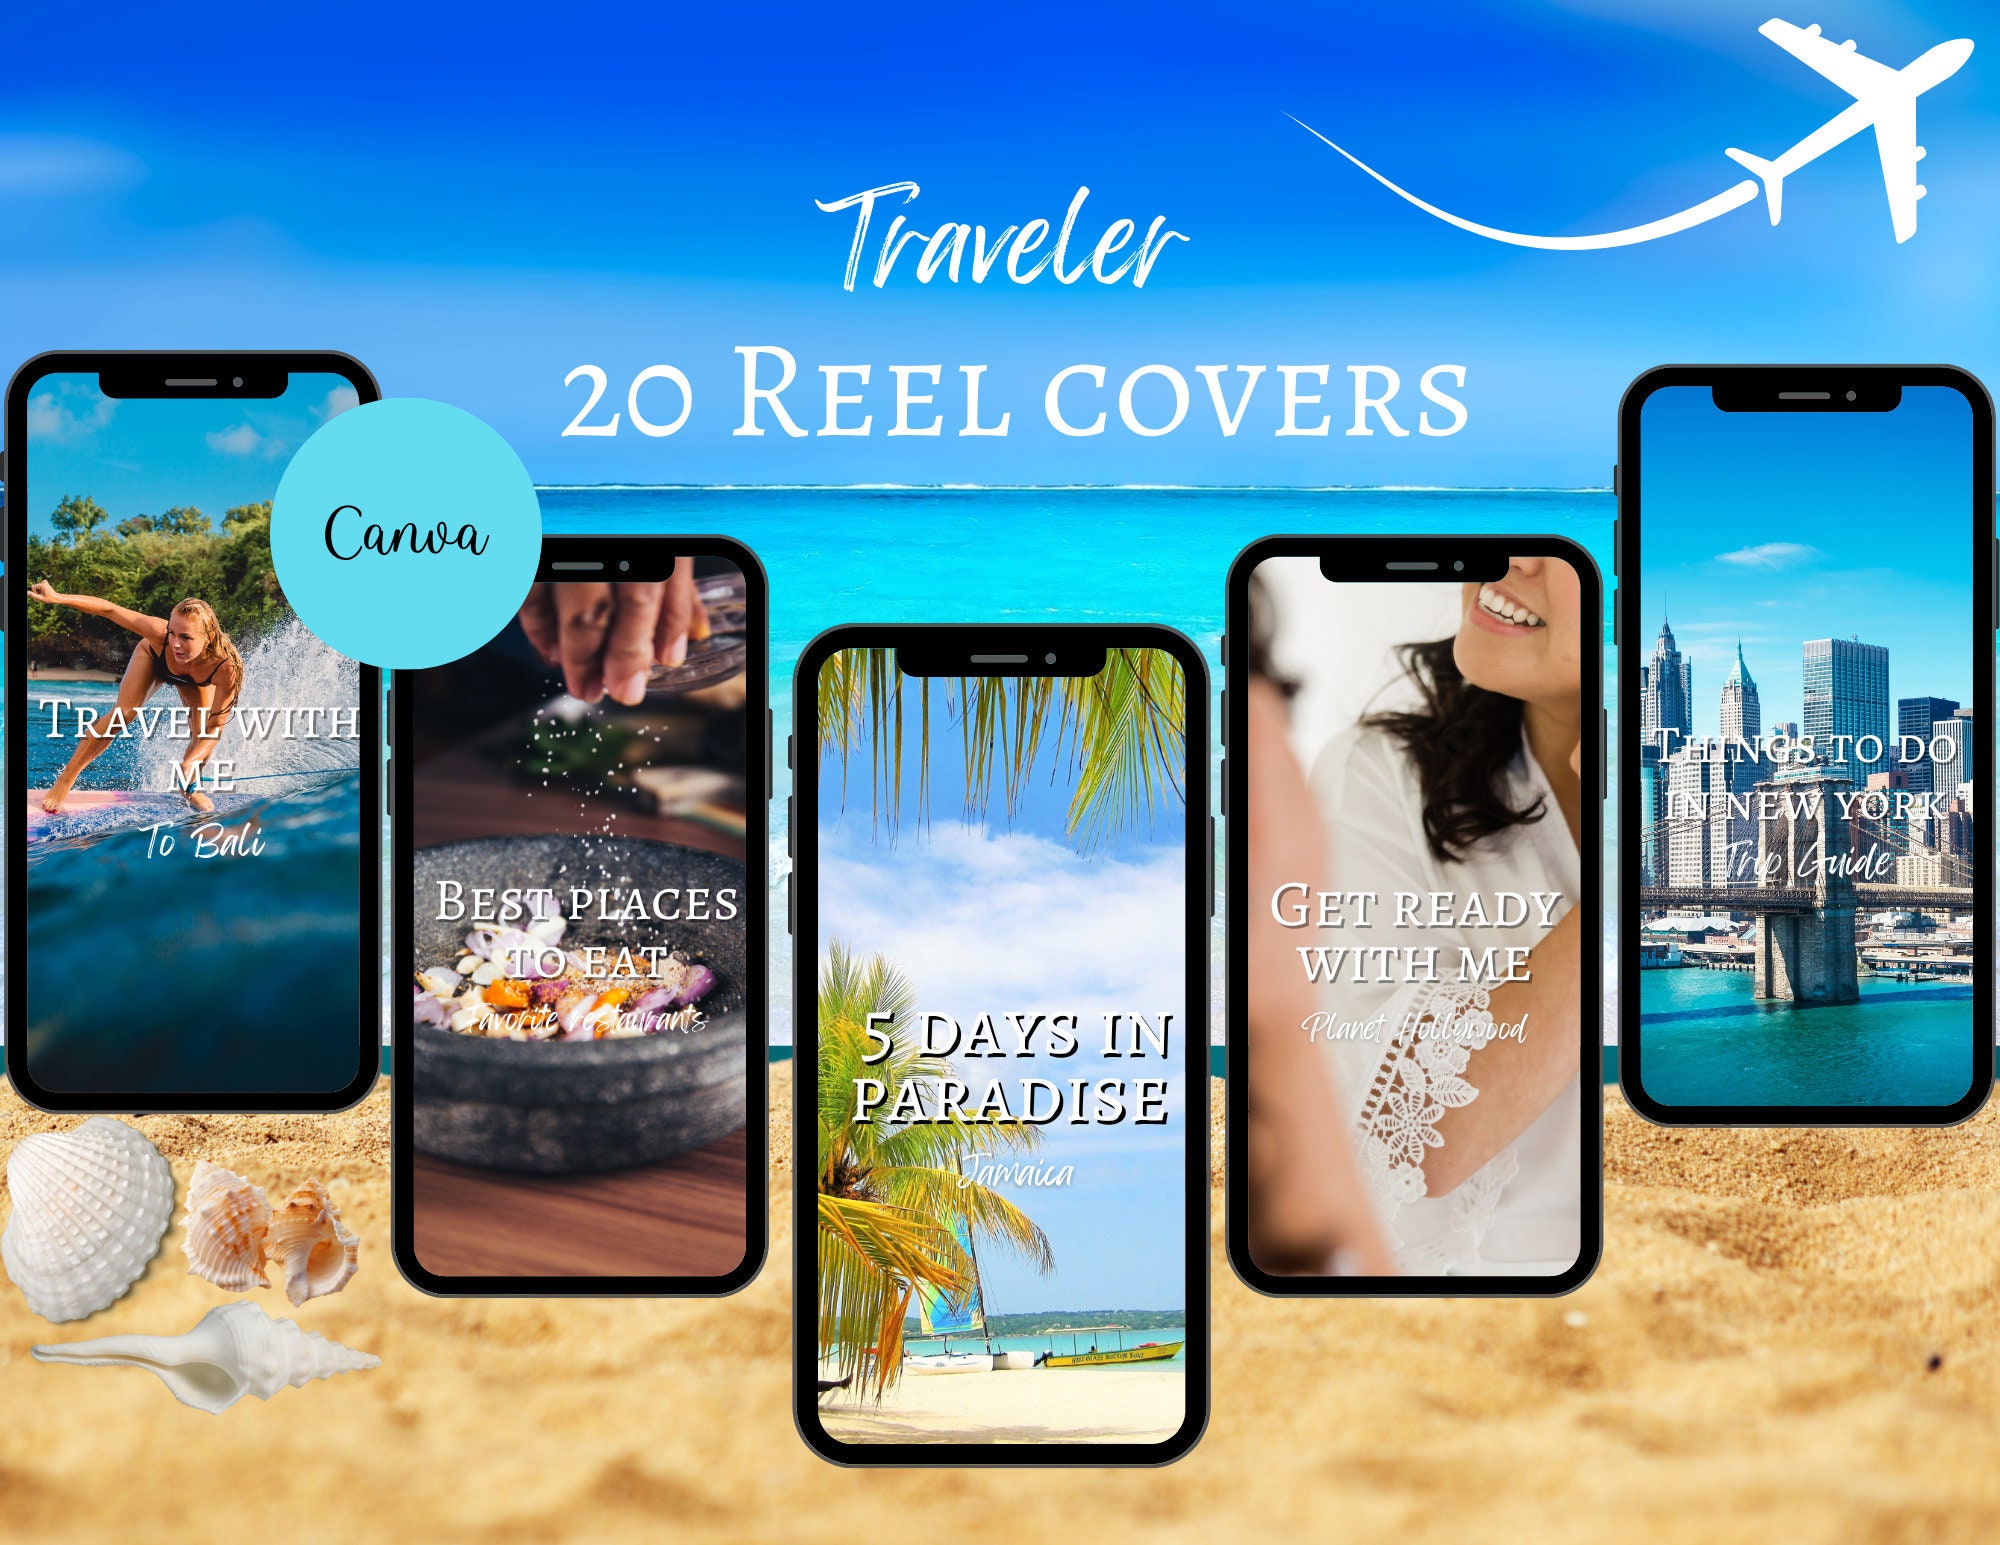 20 Instagram Reel Templates Travel Reel Covers Reel Cover Template Editable  in Canva Reel Template Cover 